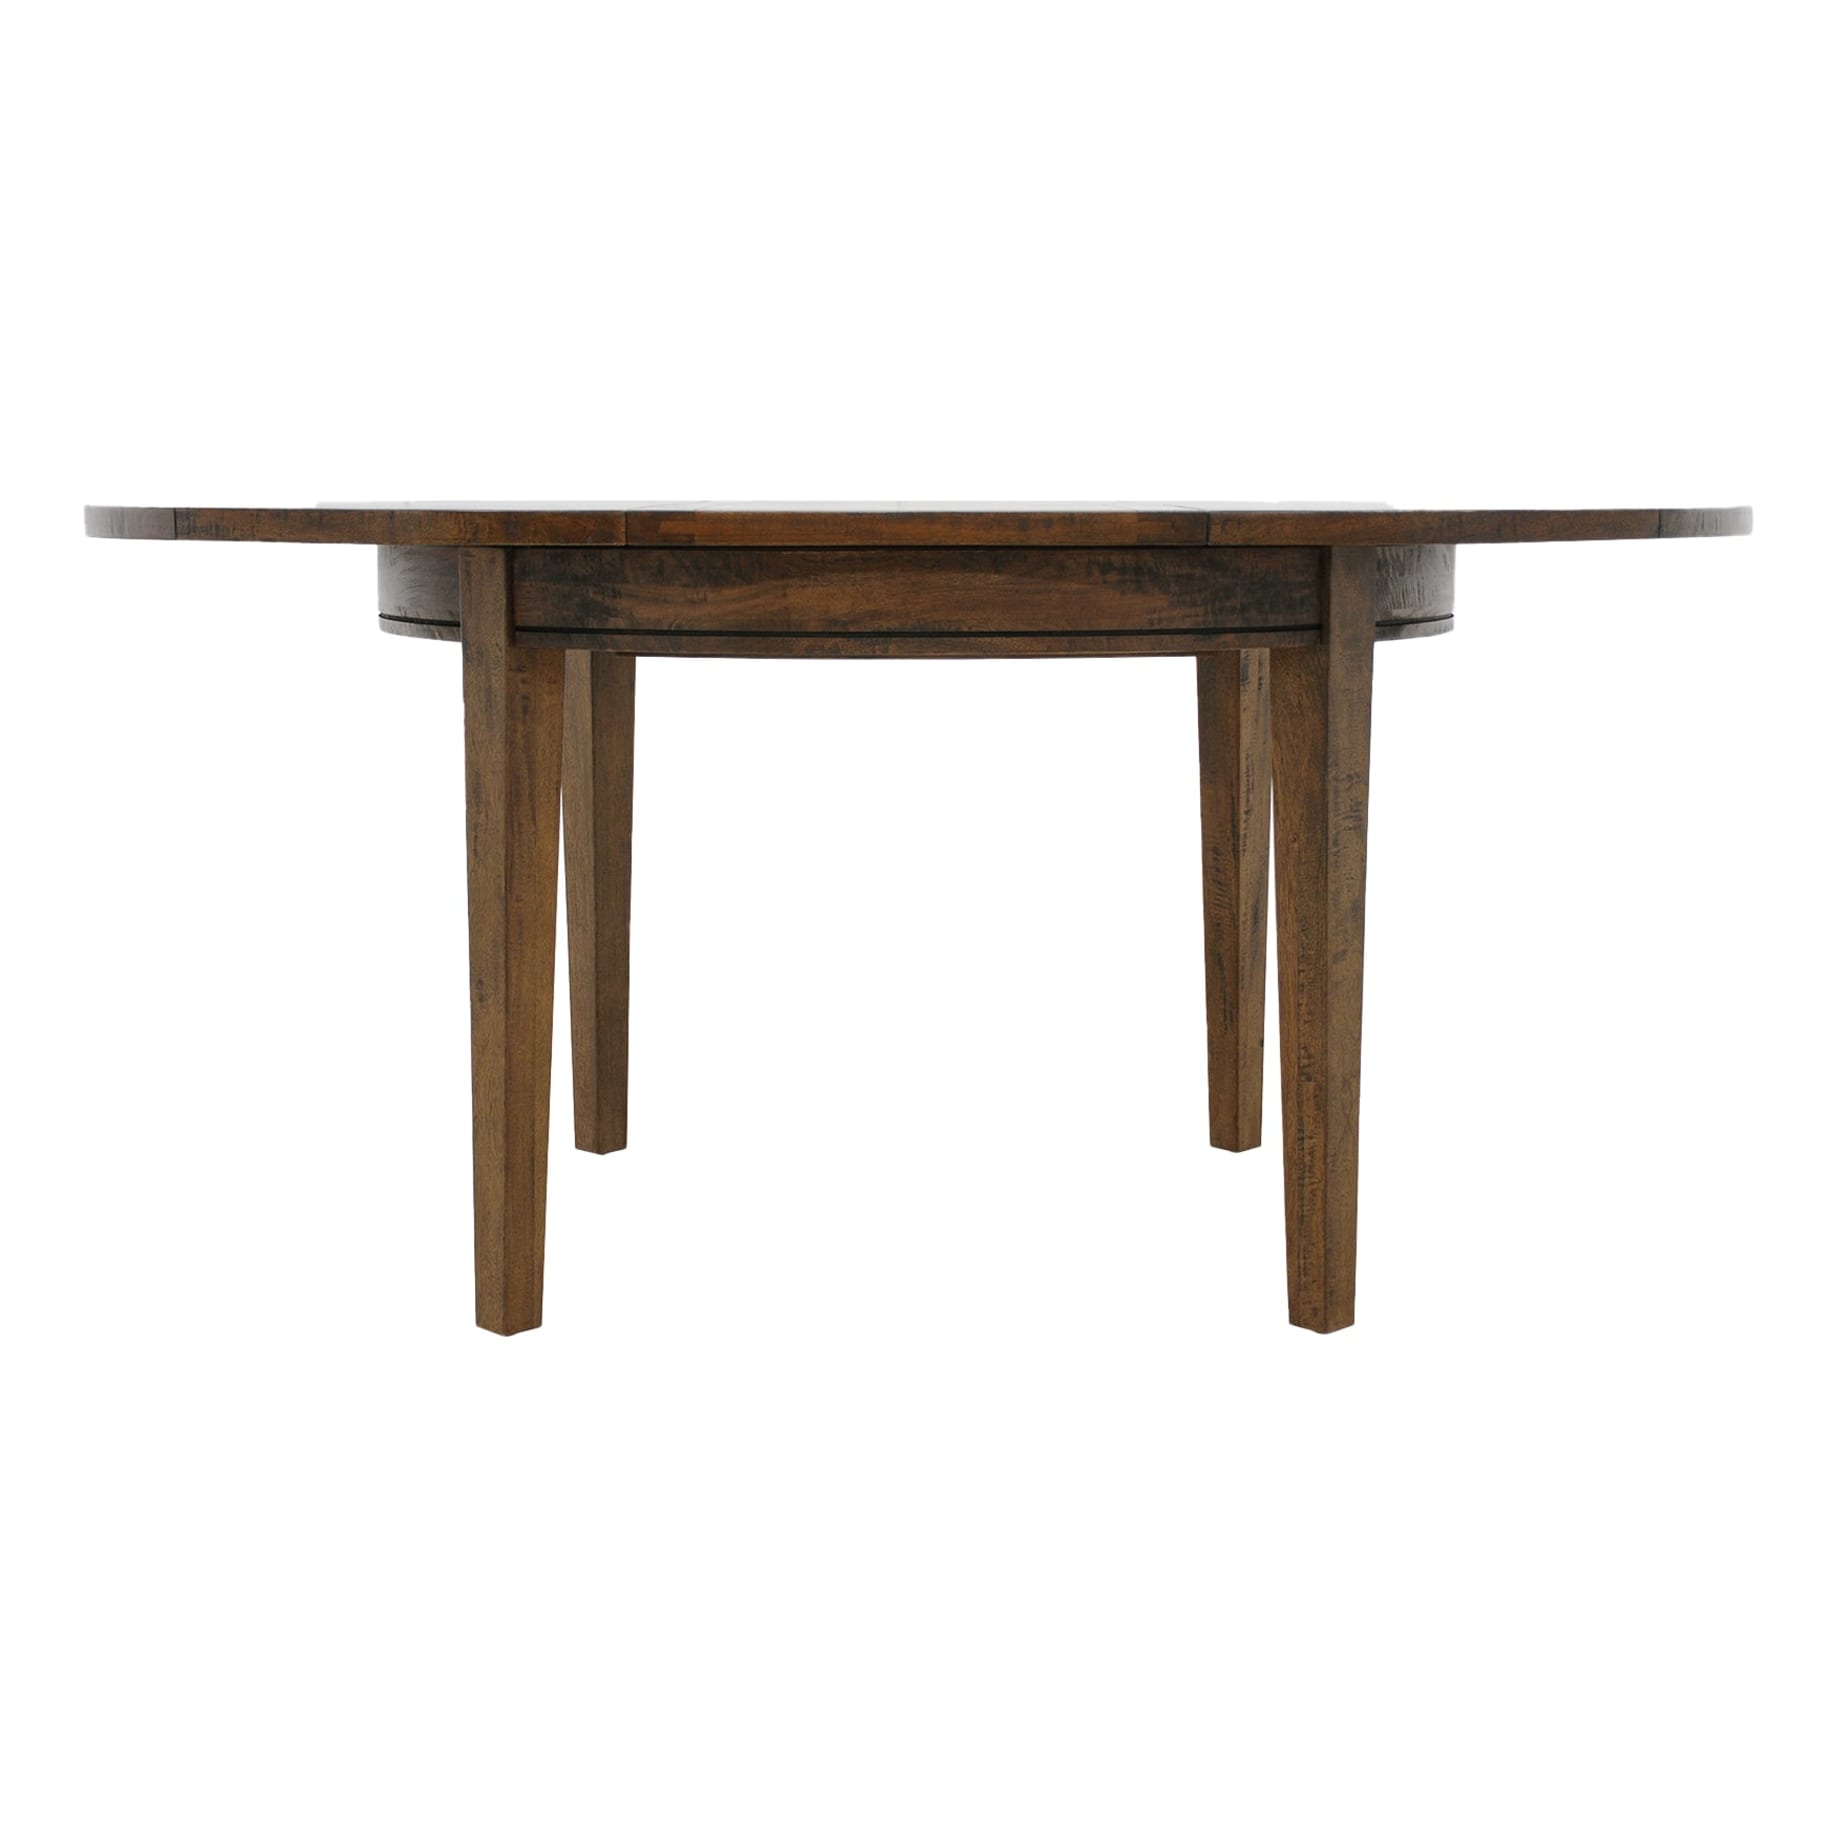 Mango Creek Round Extension Dining Table 120-170cm in Rustic Chocolate